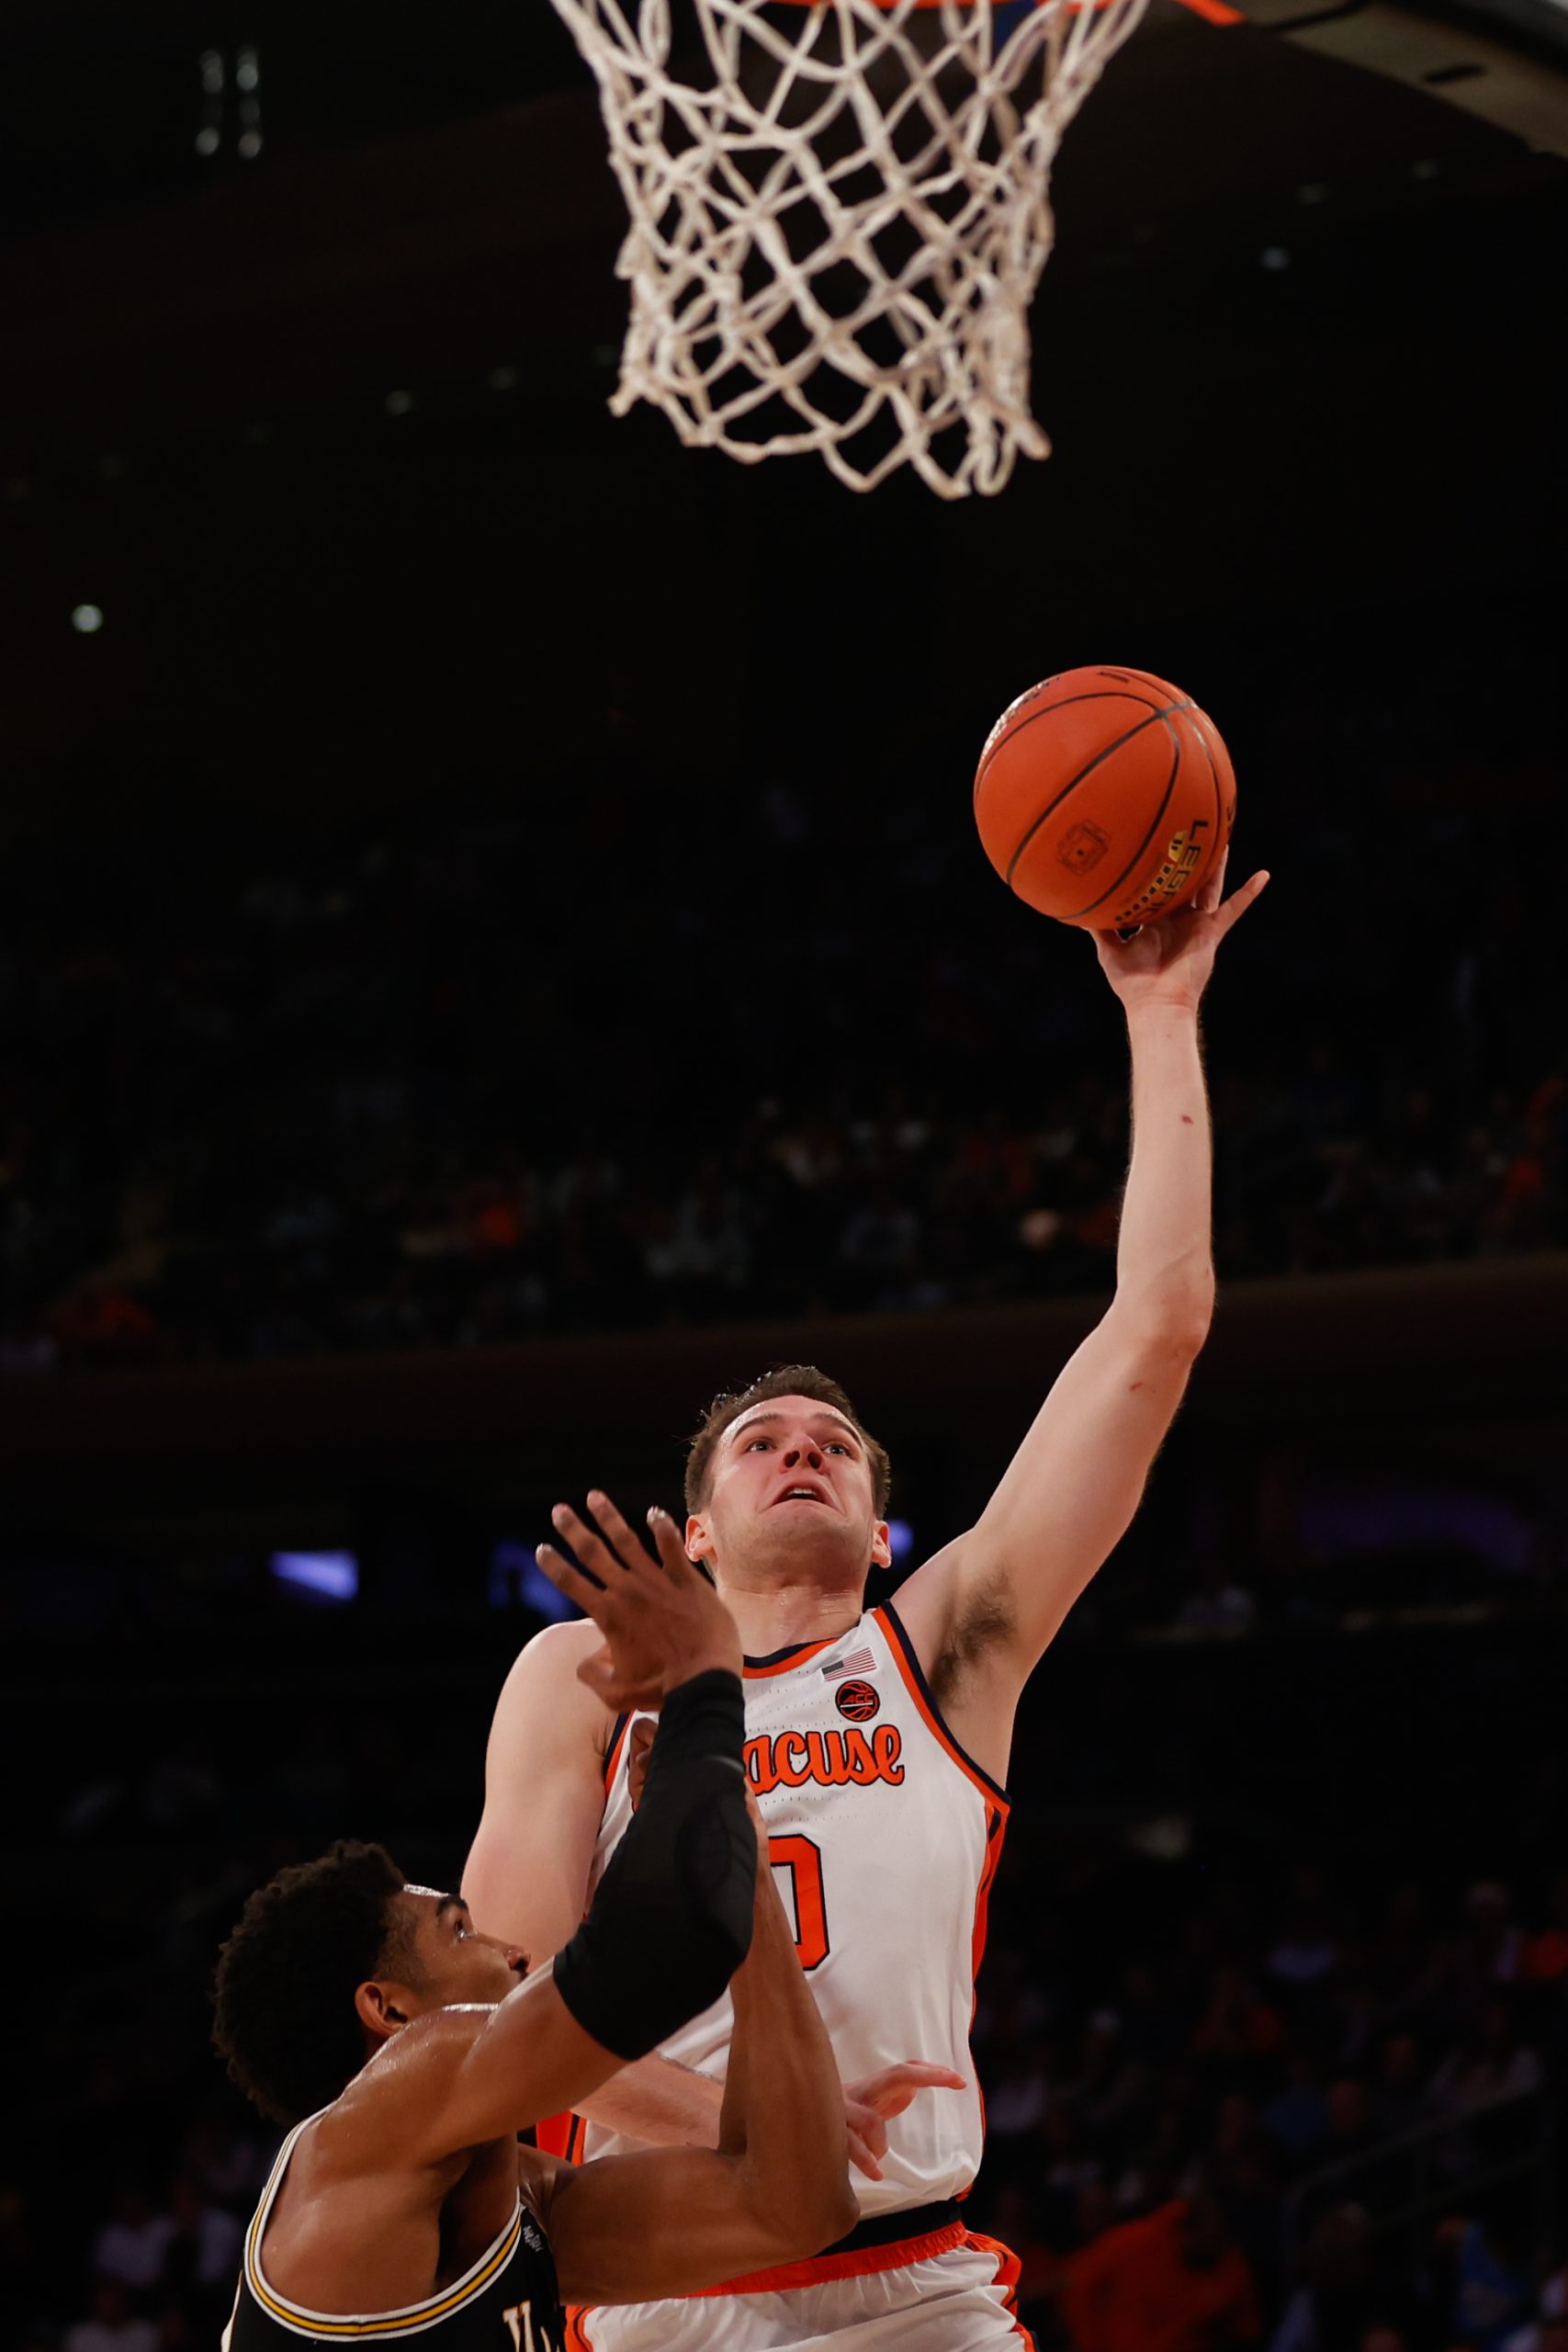 Jimmy Boeheim III attempts a shot over a Villanova defender during the Jimmy V Classic at Madison Square Garden on December 7, 2021. Syracuse Men's Basketball in action against Villanova during the Jimmy V Classic at Madison Square Garden on December 7, 2021